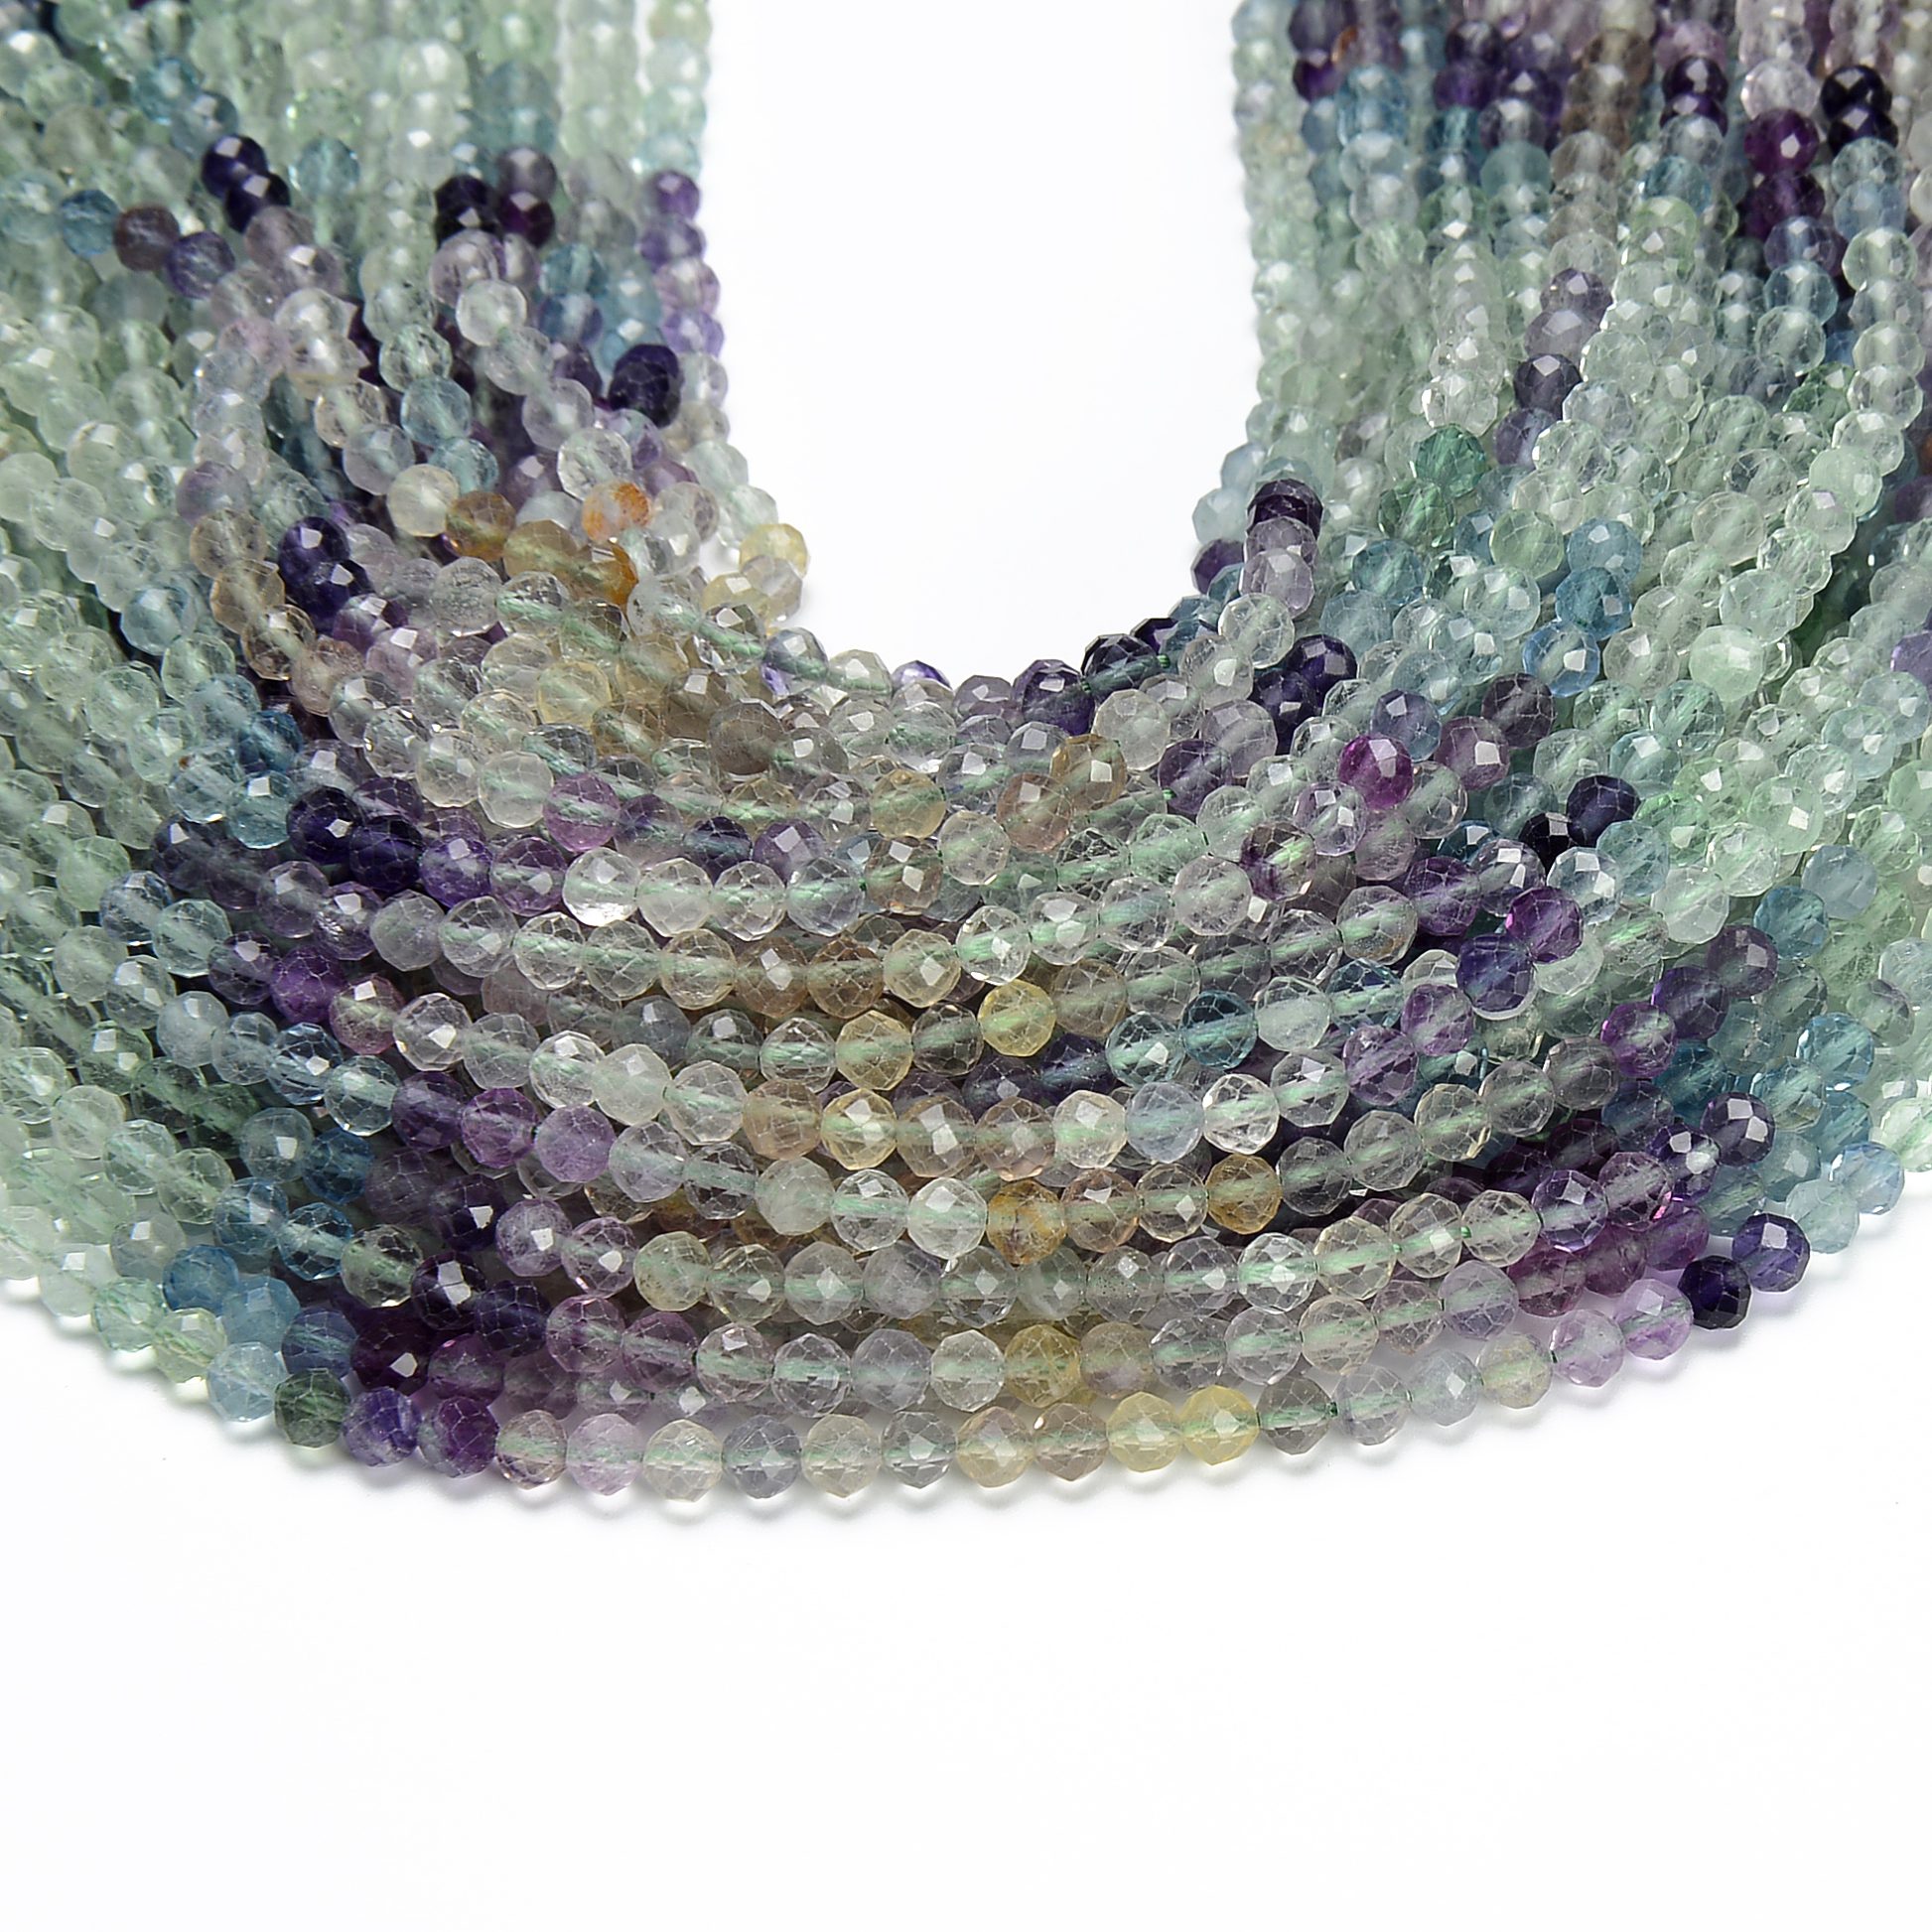 Natural Fluorite Micro Cut Faceted Rondelle Bead,Fluorite Faceted Bead,Fluorite Rondelle Bead,Fluorite Micro Cut Bead,2-2.5MM Fluorite Beads